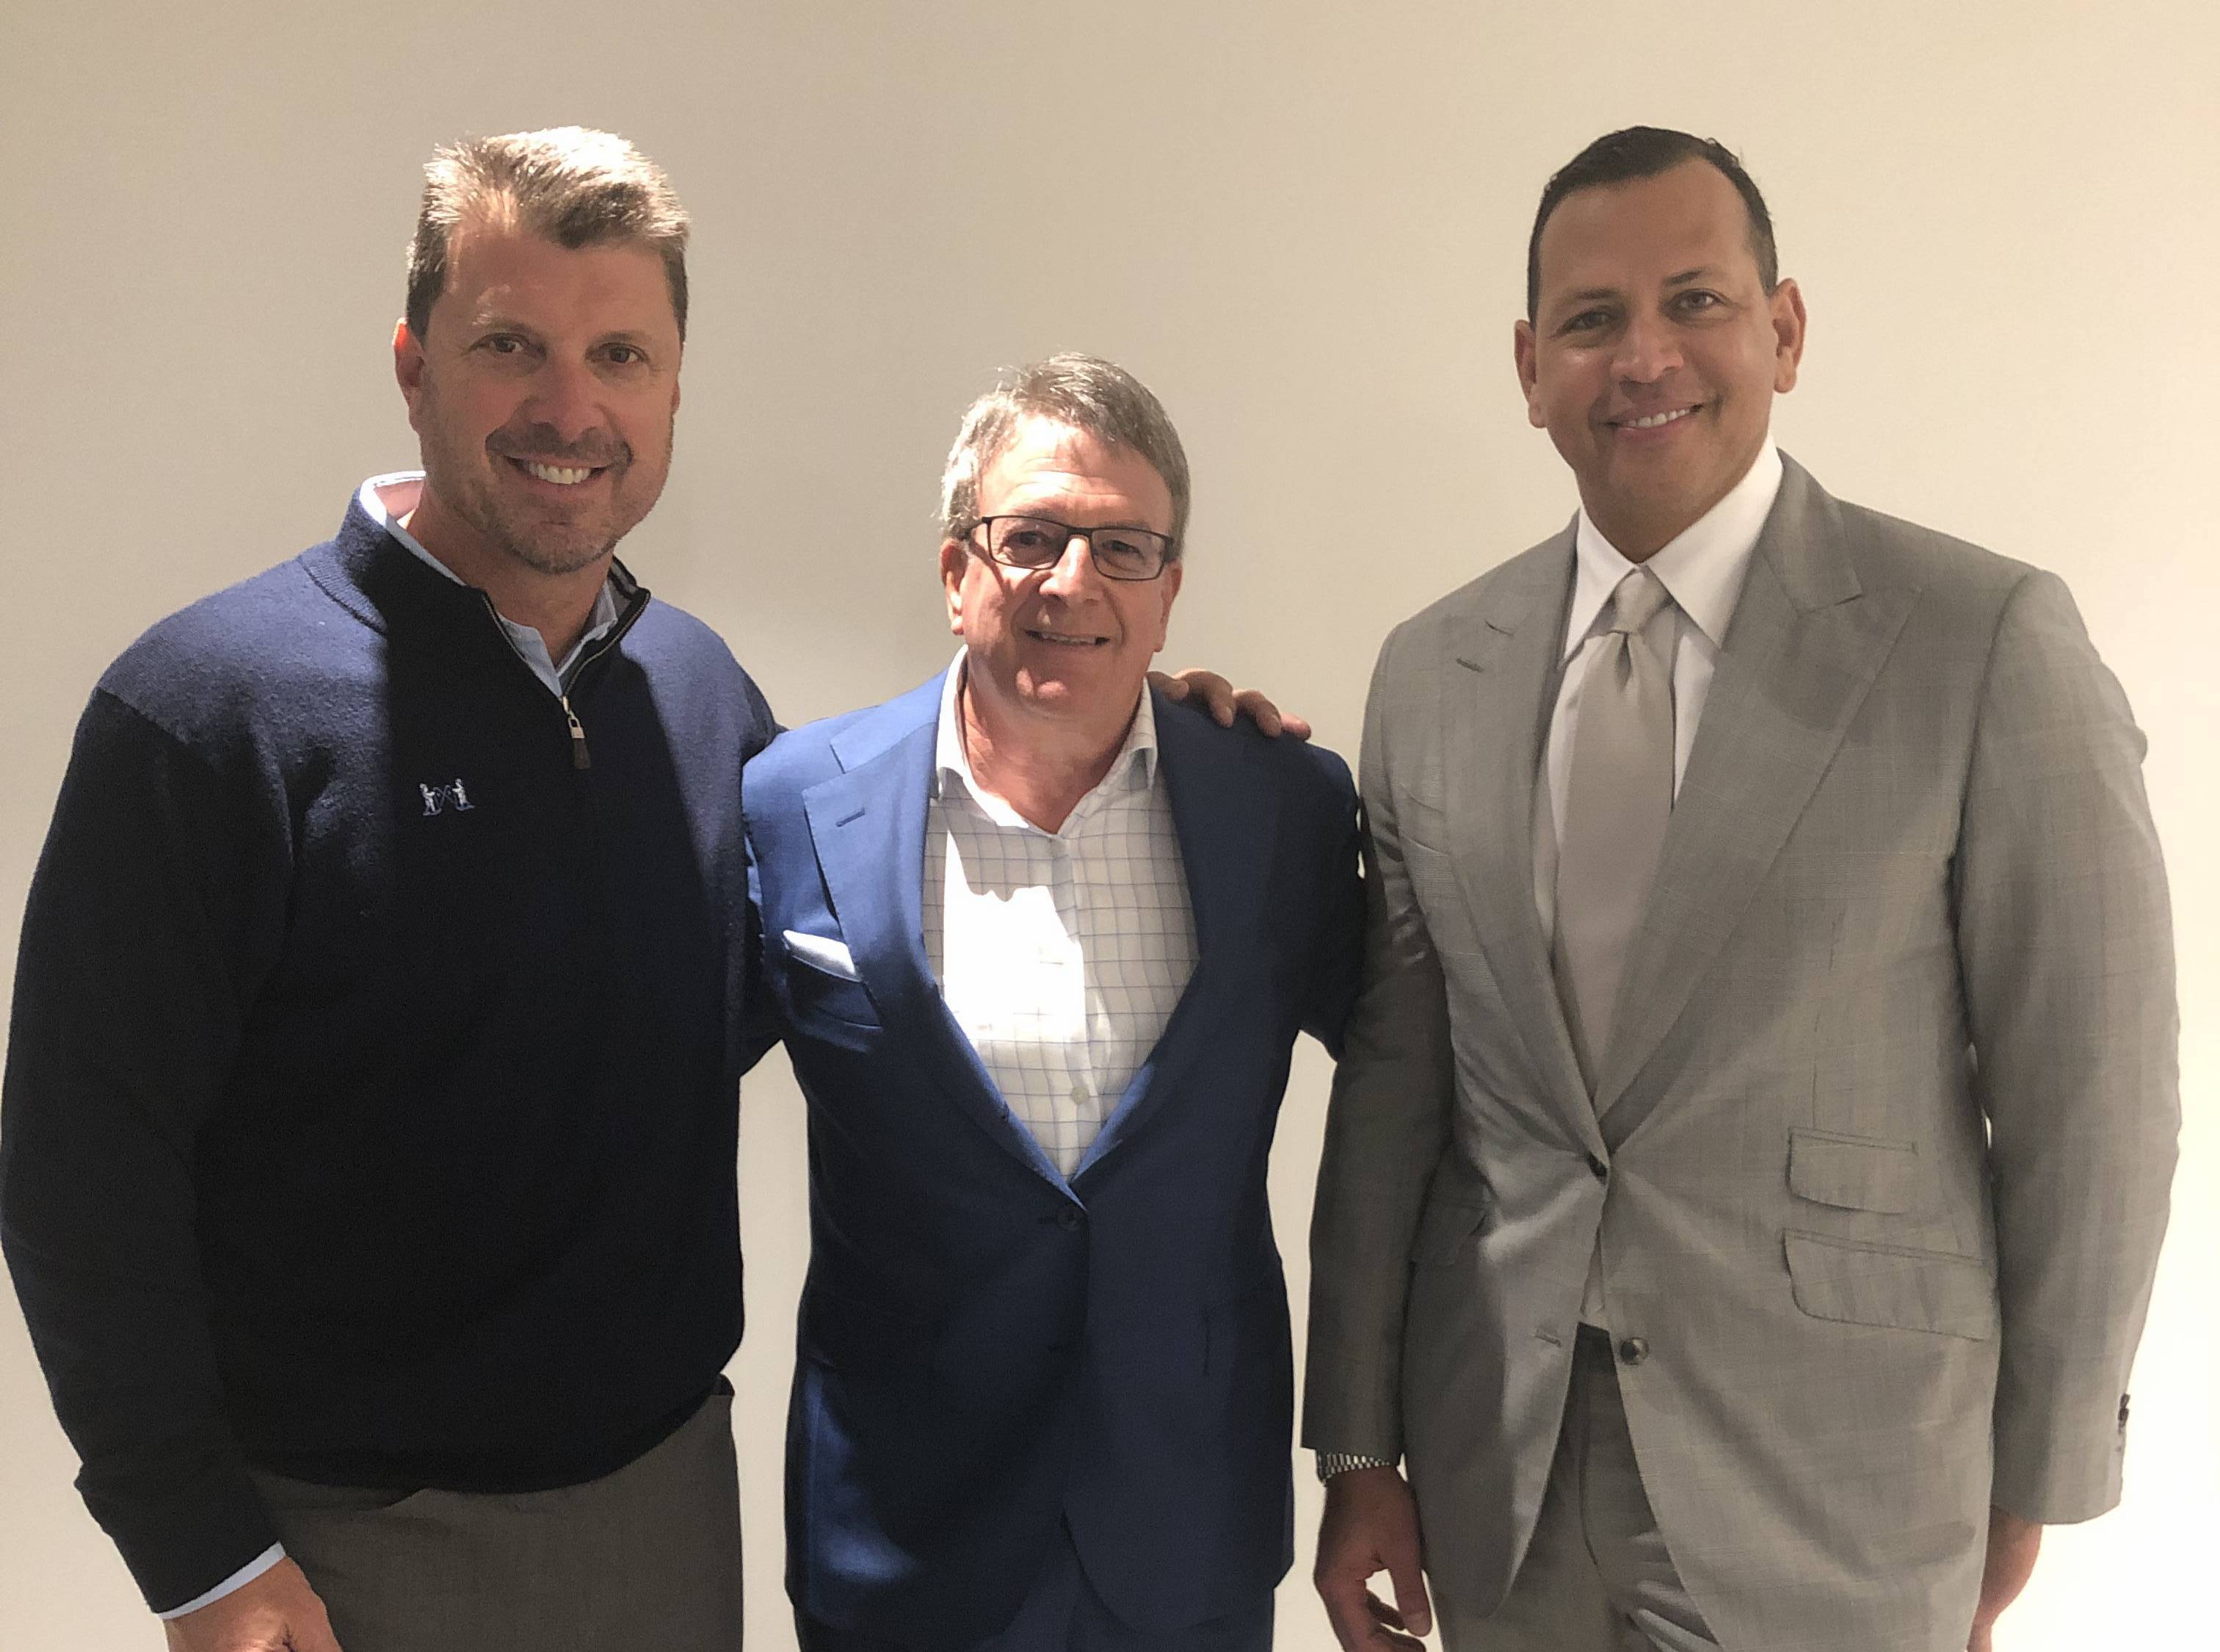 Alex Rodriguez and Tino Martinez at the 2019 ICAP Charity Day event